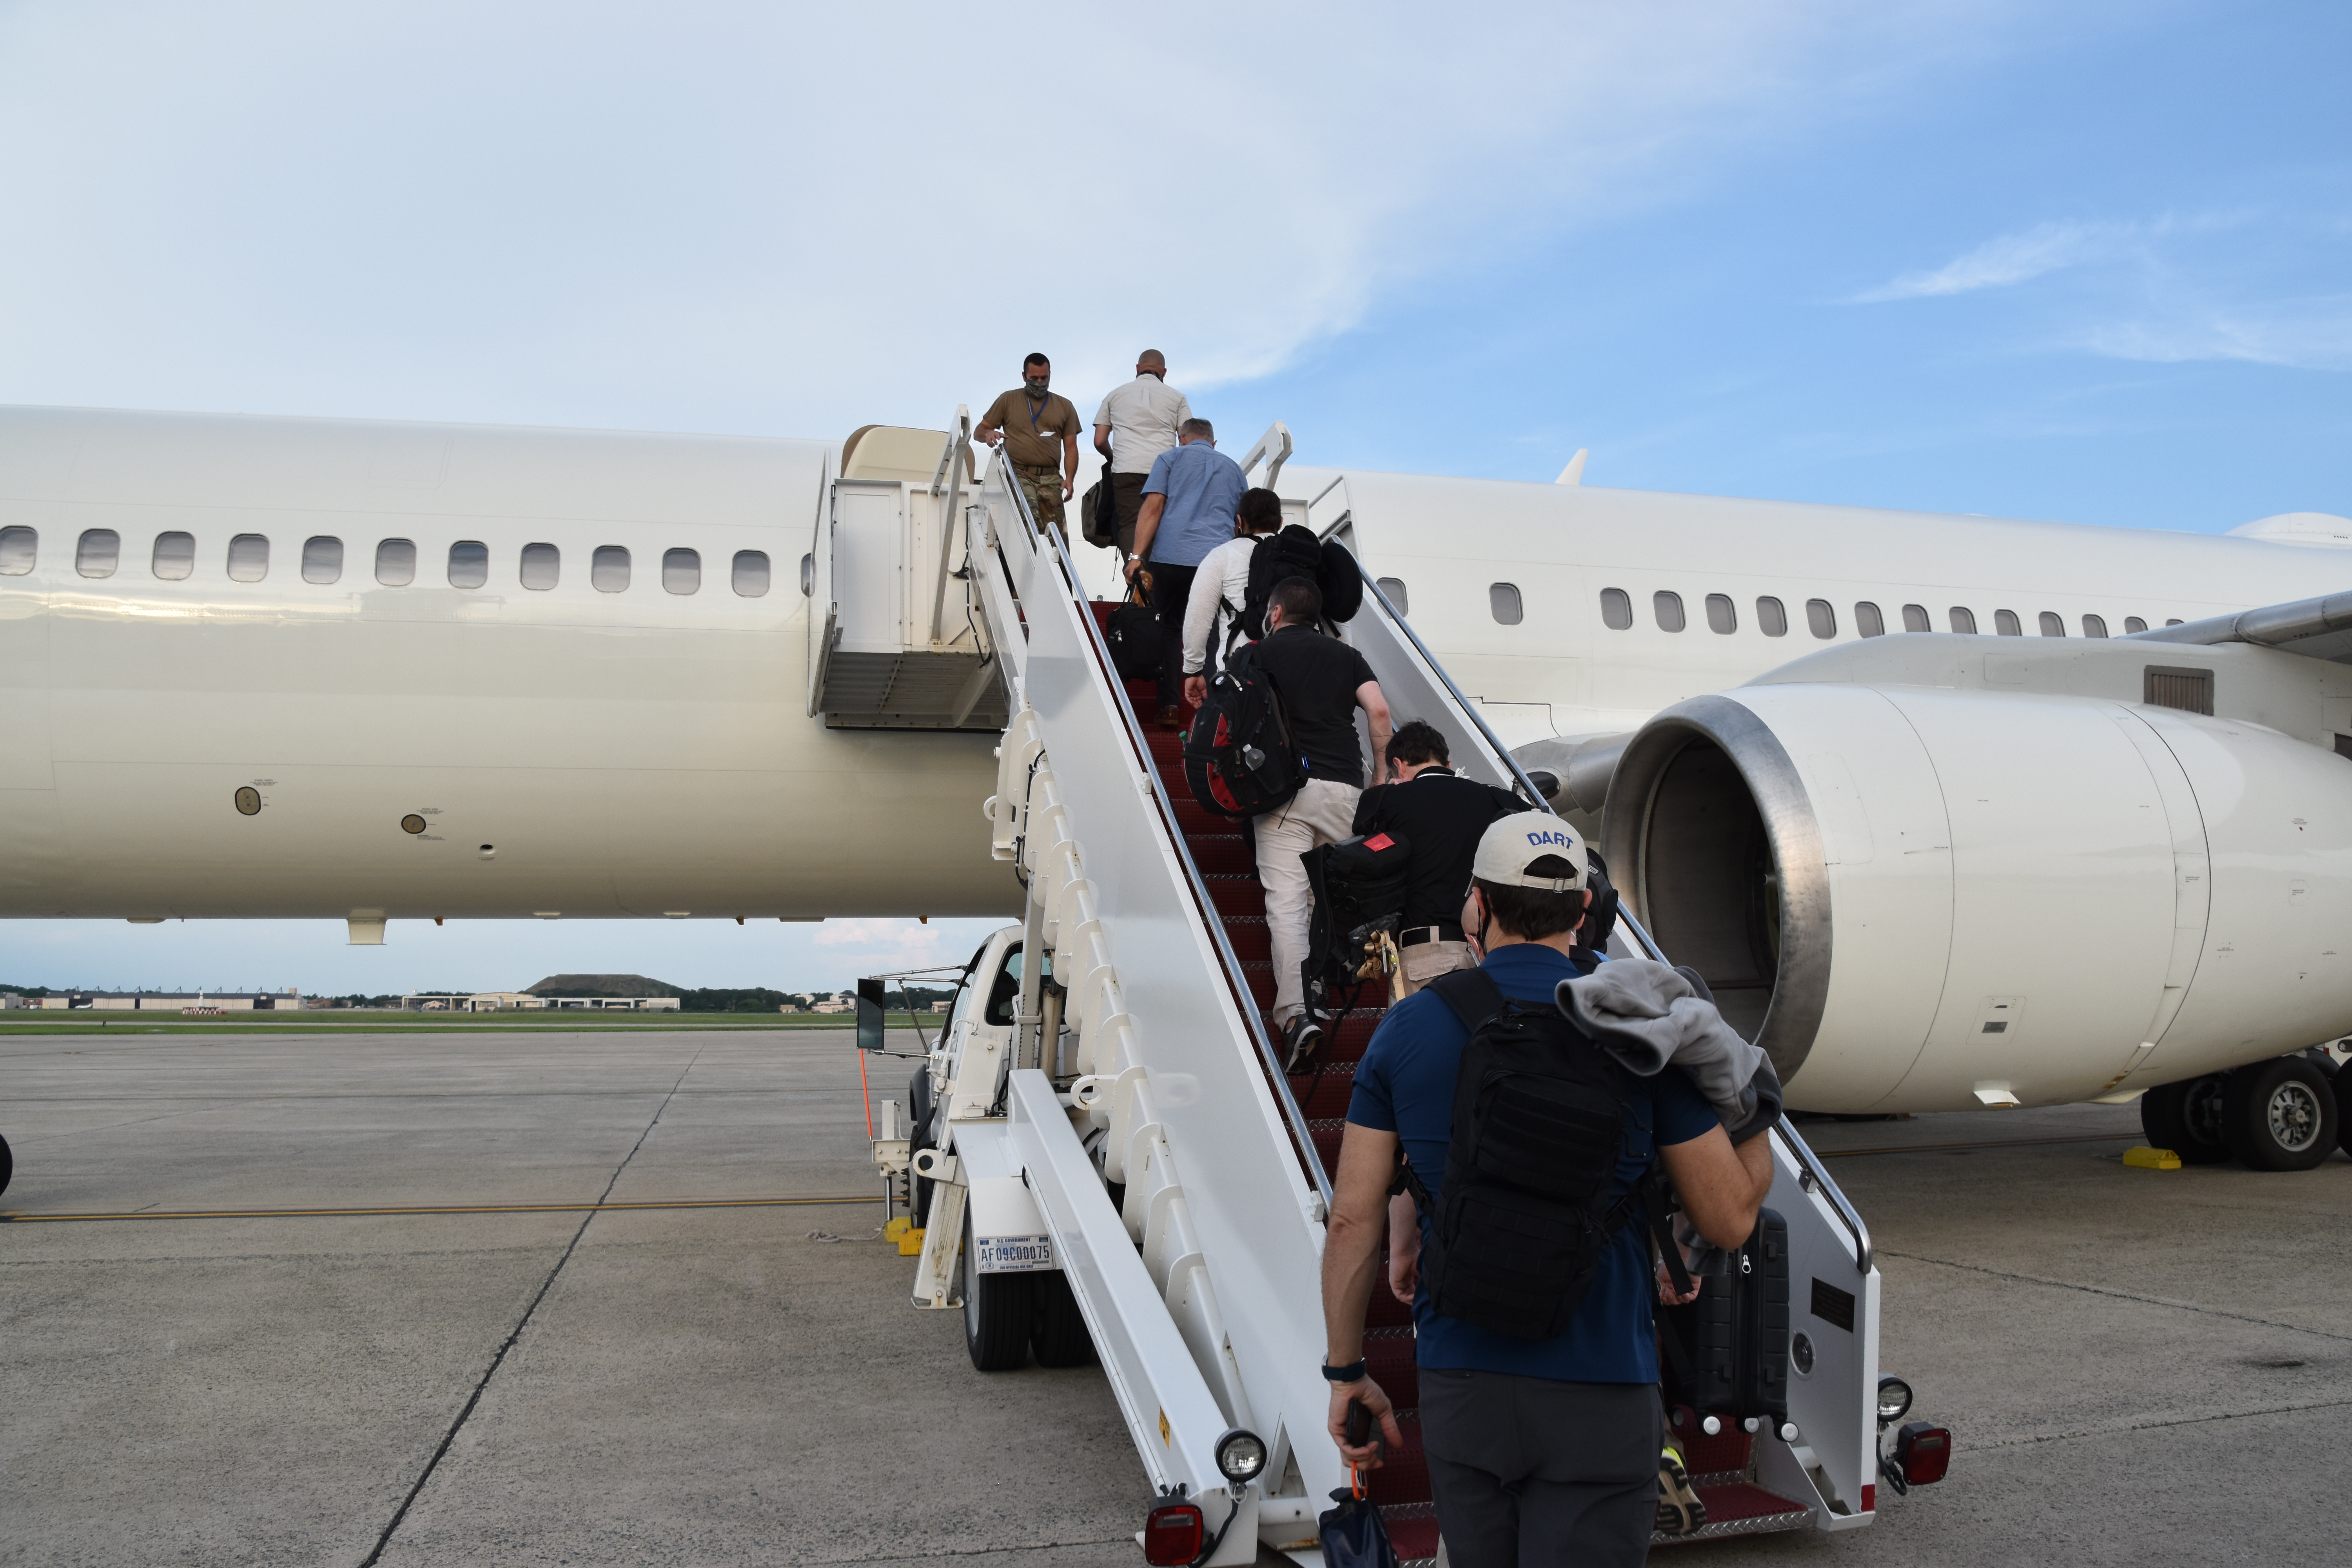 Foreign Emergency Support Team members board an aircraft bound for Lebanon to lend support to the U.S. Embassy in Beirut as part of the U.S. government’s response following a large explosion, Andrews Air Force Base, Md., Aug. 7, 2020. (U.S. Department of State photo)